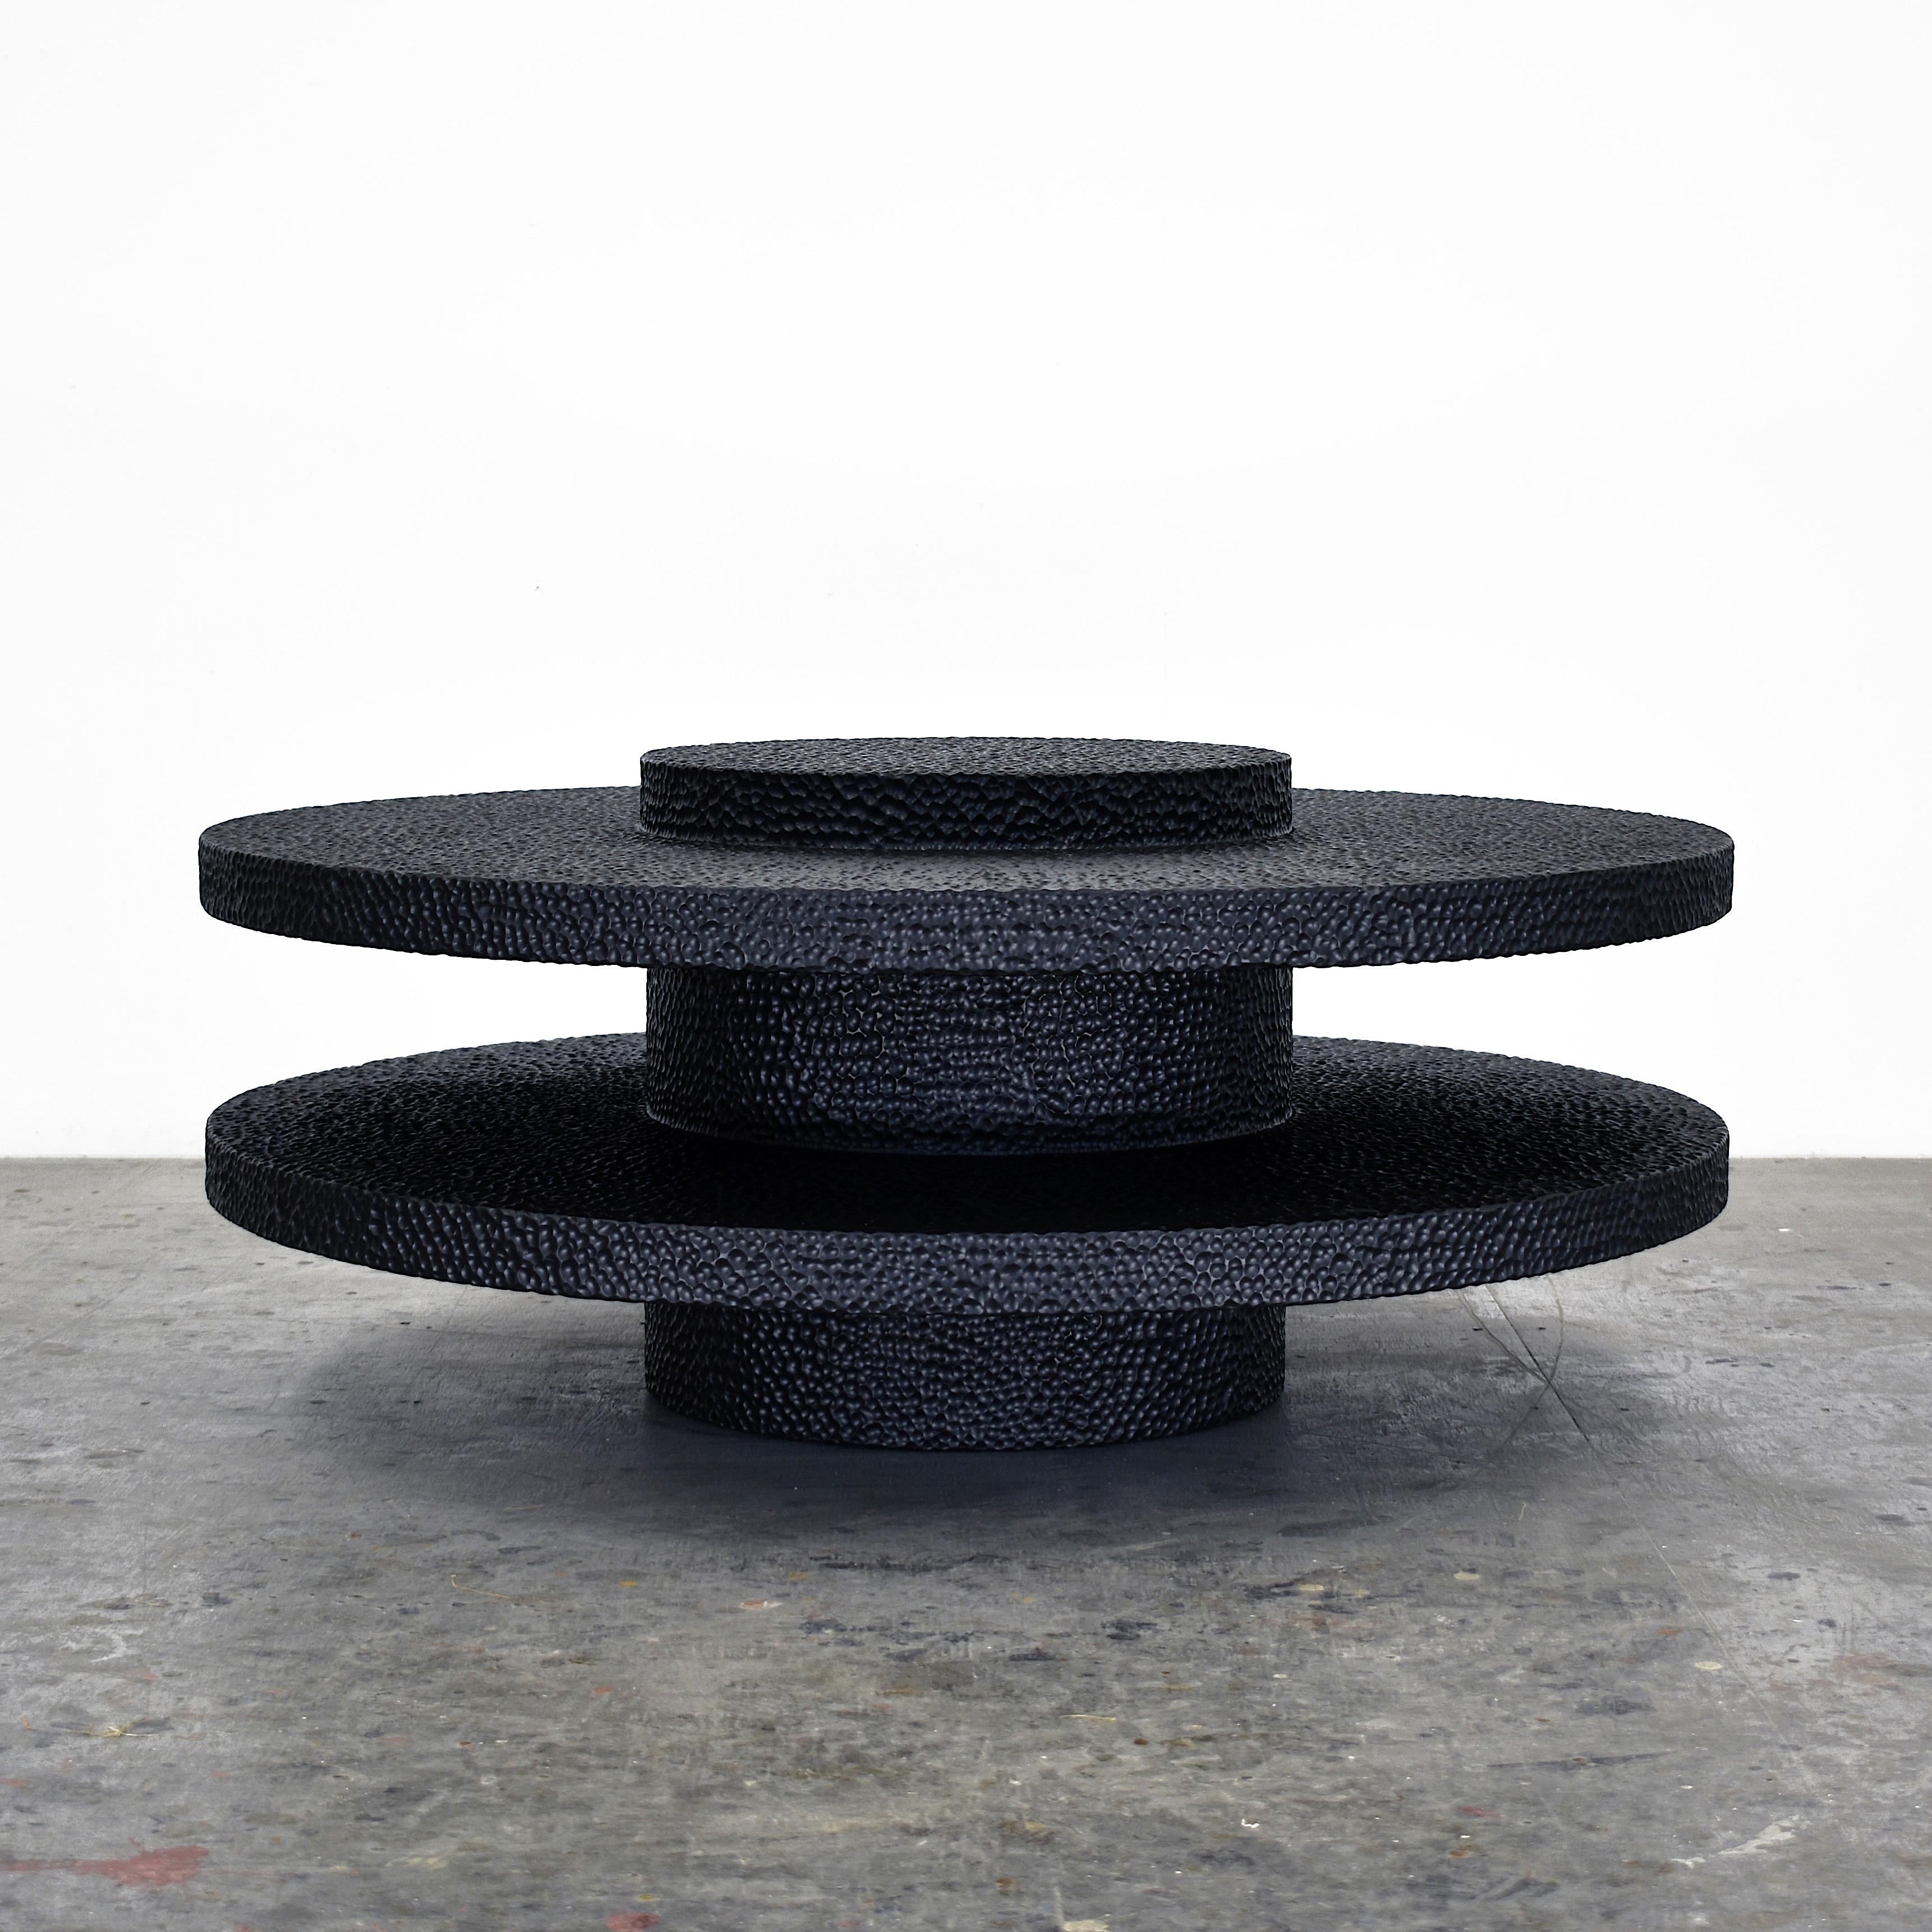 Maple round table sculpted by John Eric Byers
Dimensions: 45.7 x diameter 107 cm
Materials: Carved blackened maple

All works are individually handmade to order.

John Eric Byers creates geometrically inspired pieces that are minimal,